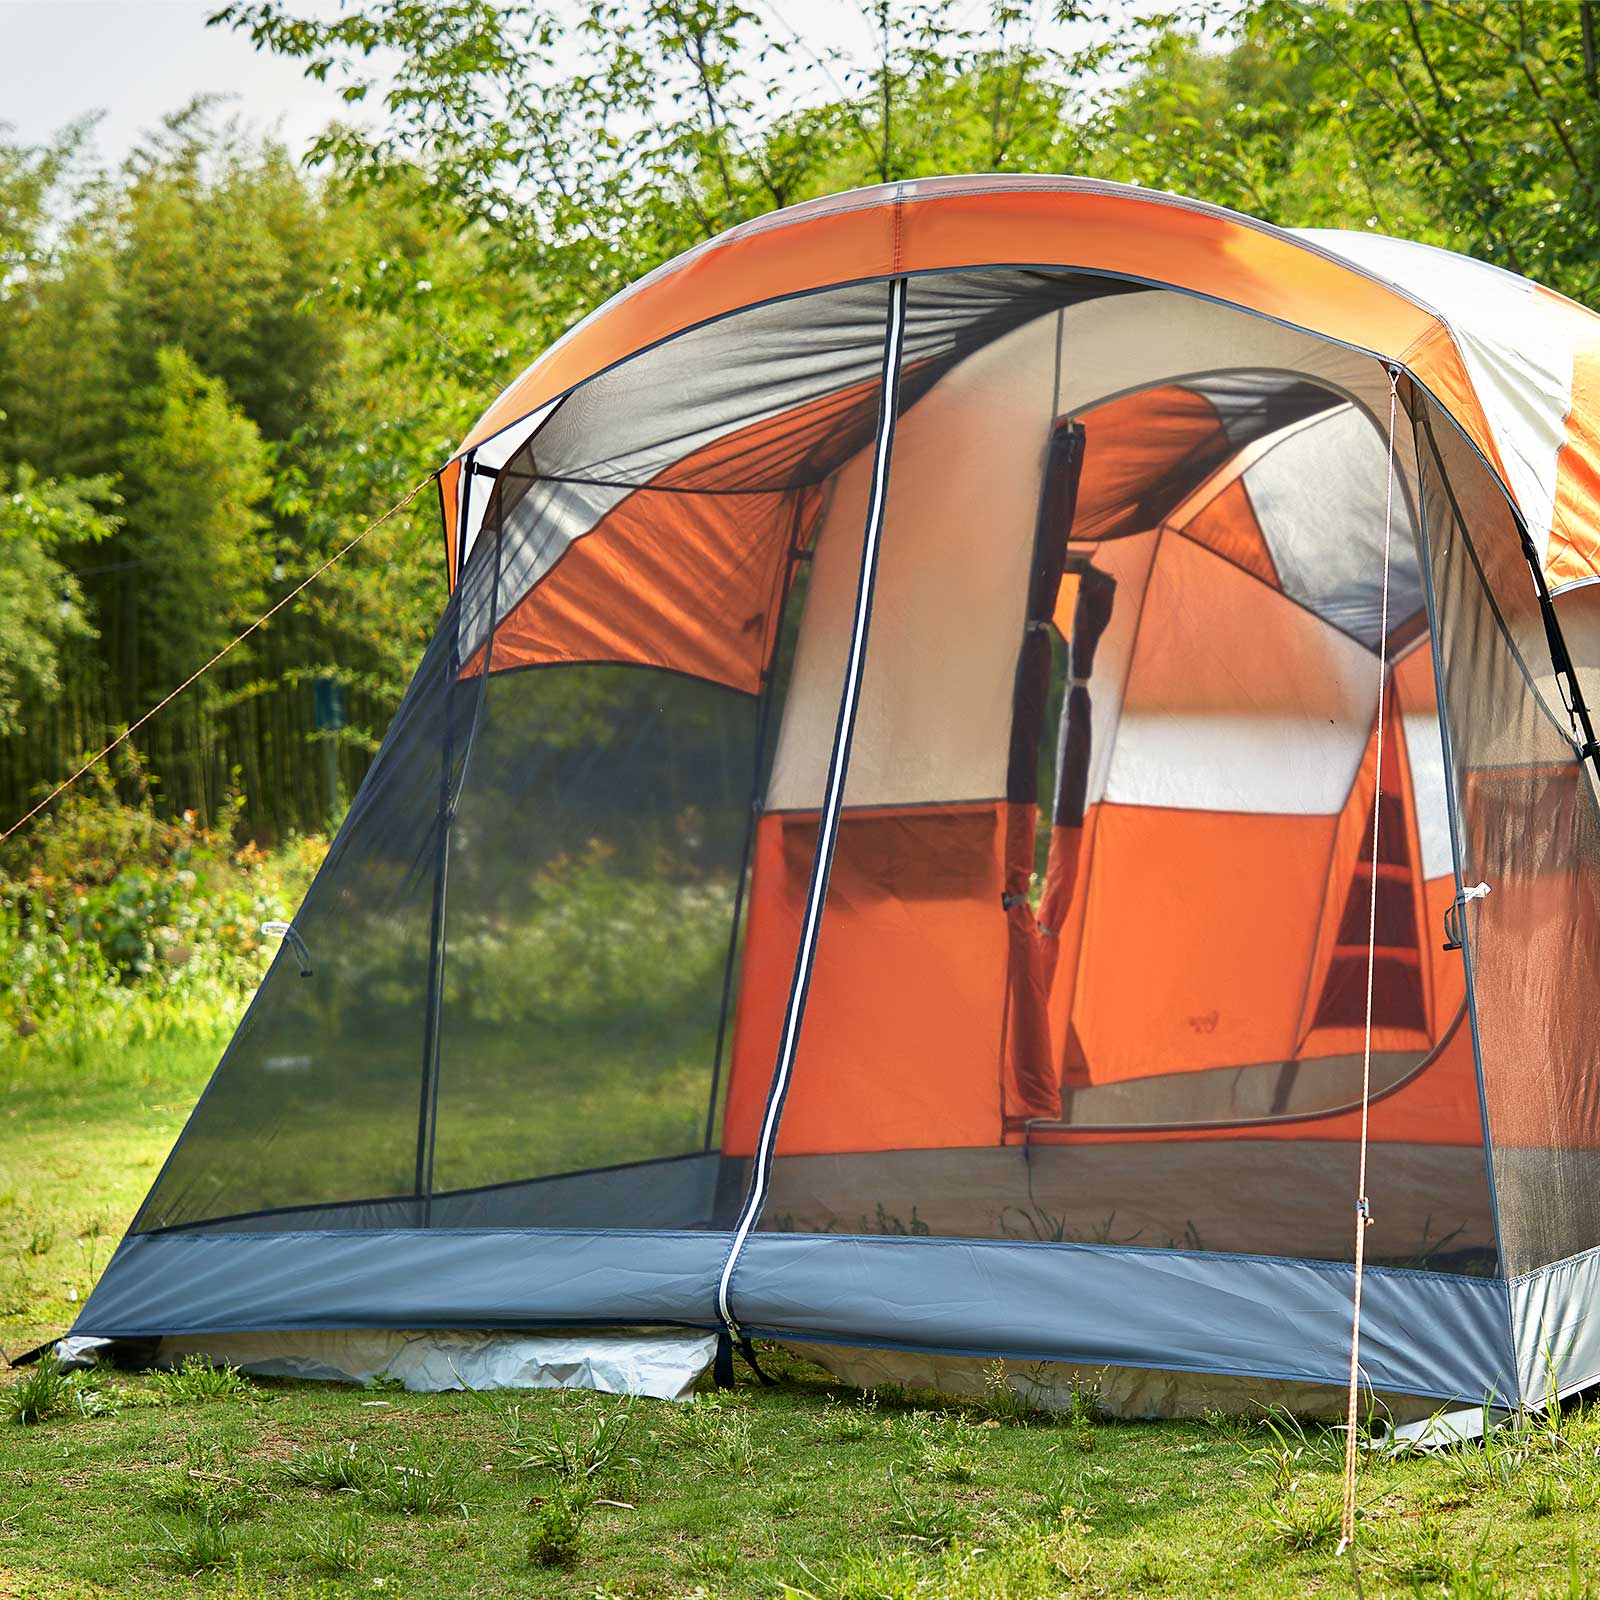 Explore the Great Outdoors with Inflatable Tents for Camping